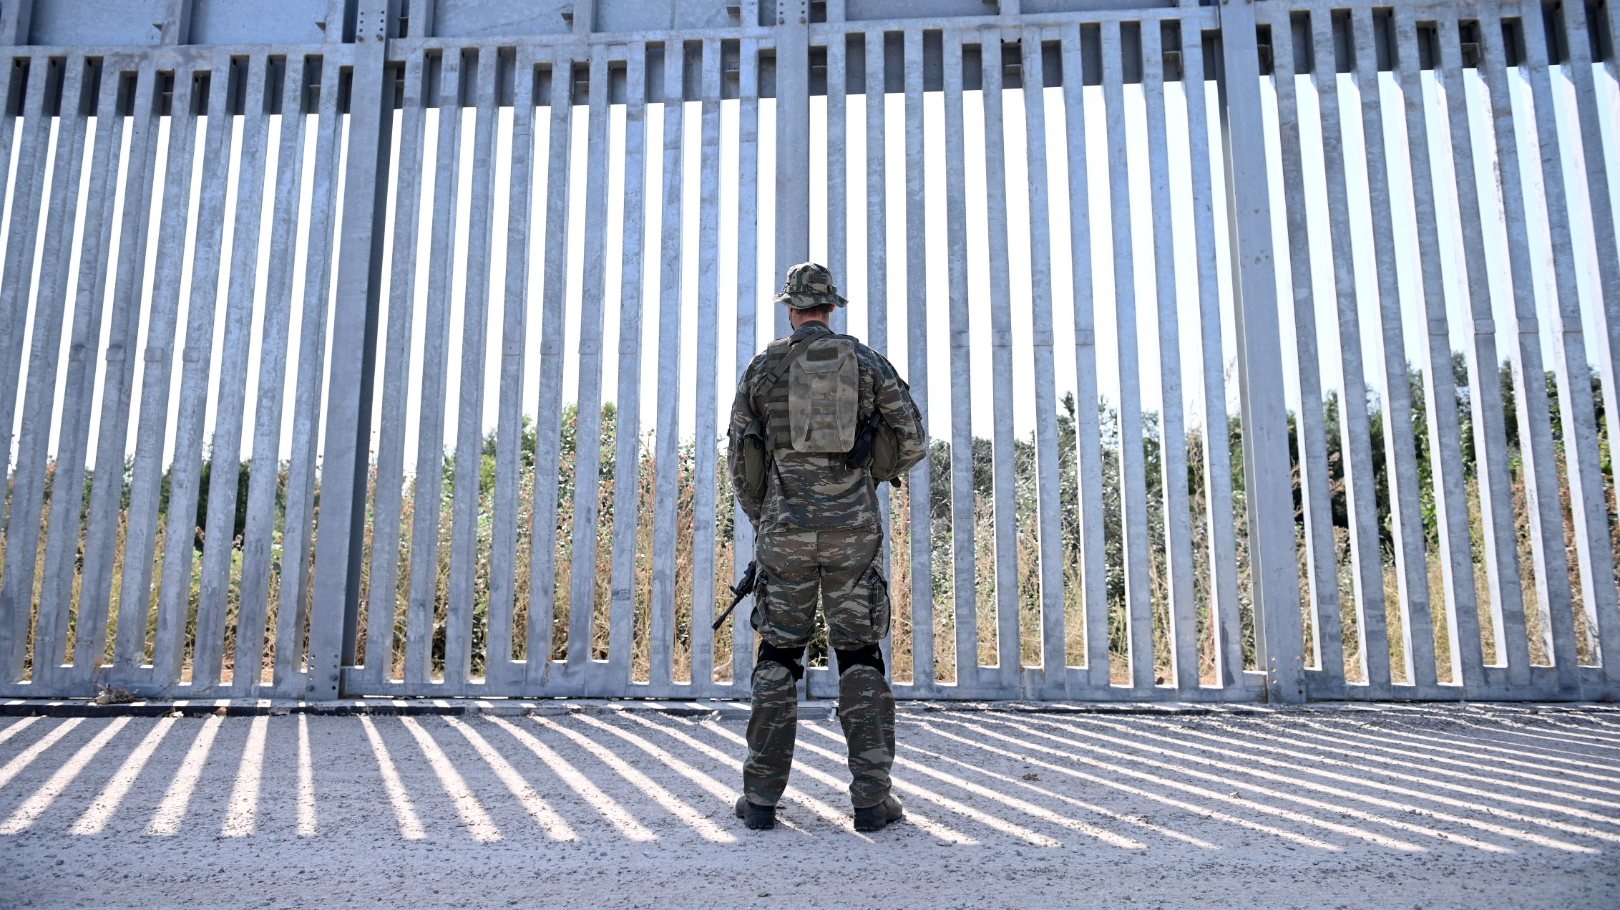 epa09440121 A soldier stands in front of a steel fence built along the Evros River in the area of Feres, at the Greek-Turkish border, Greece, 01 September 2021. The fence was built to prevent the illegal arrival of migrants into Greek territory.  EPA/DIMITRIS ALEXOUDIS